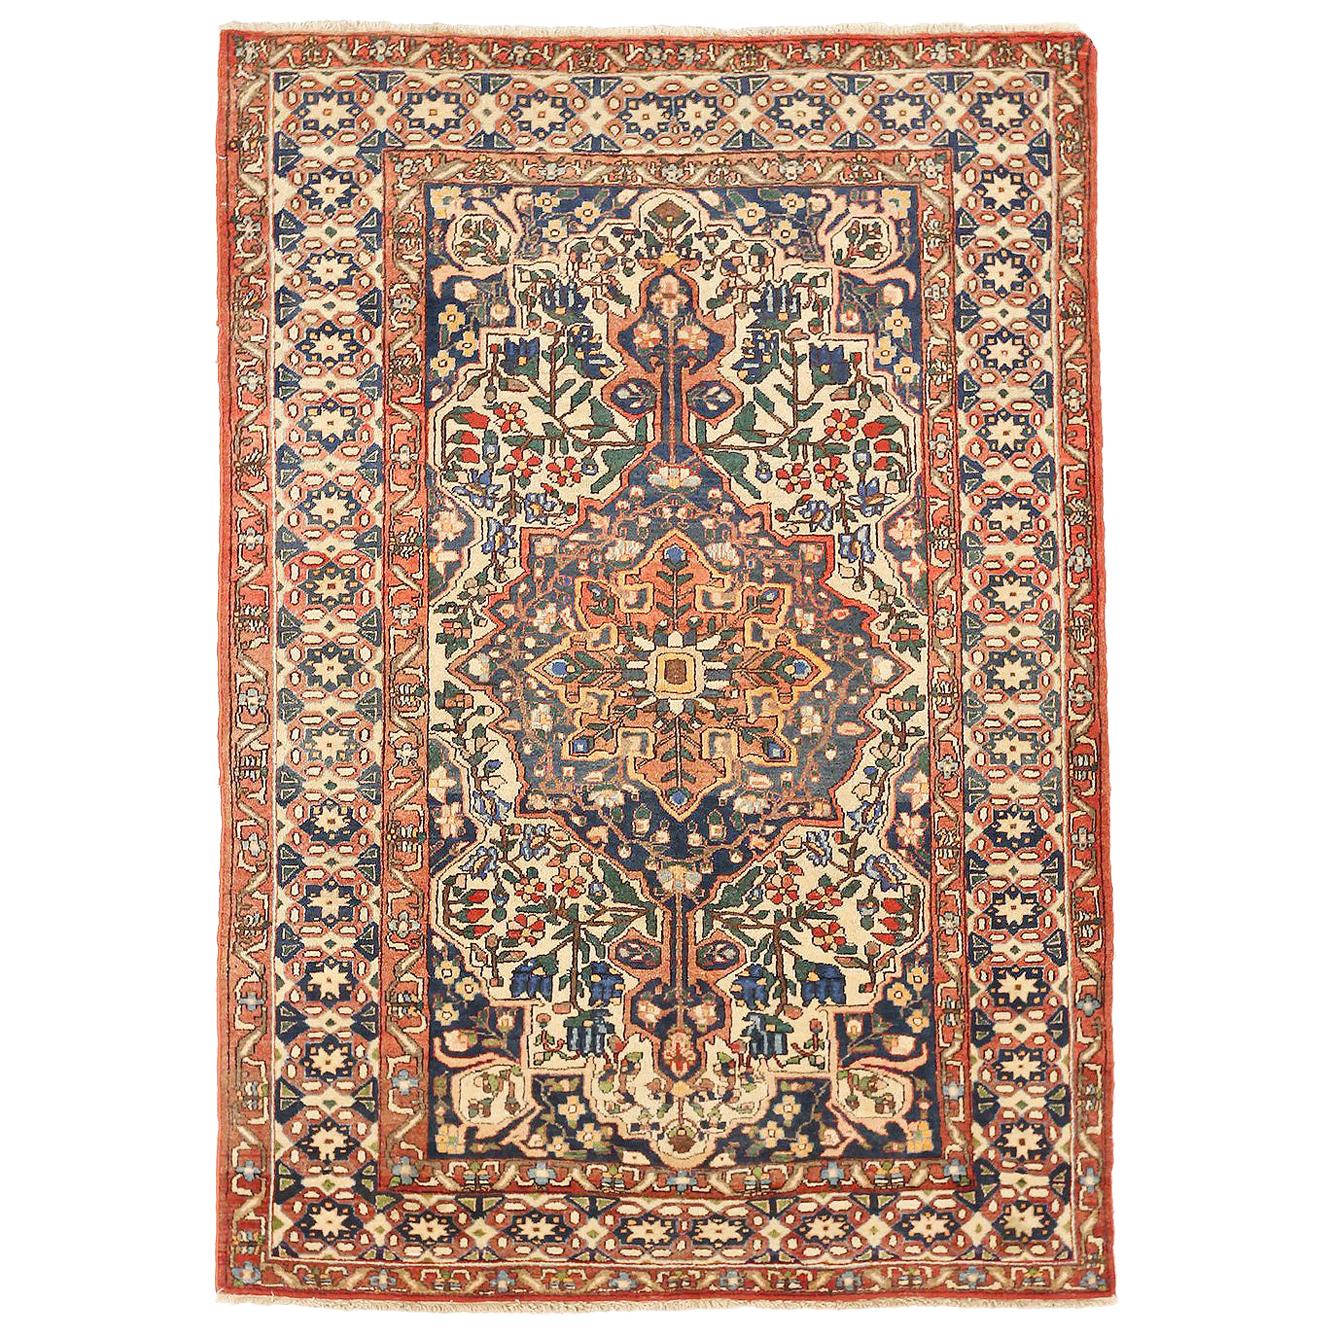 Antique Persian Bakhtiar Rug with Green and Blue Floral Details on Ivory Field